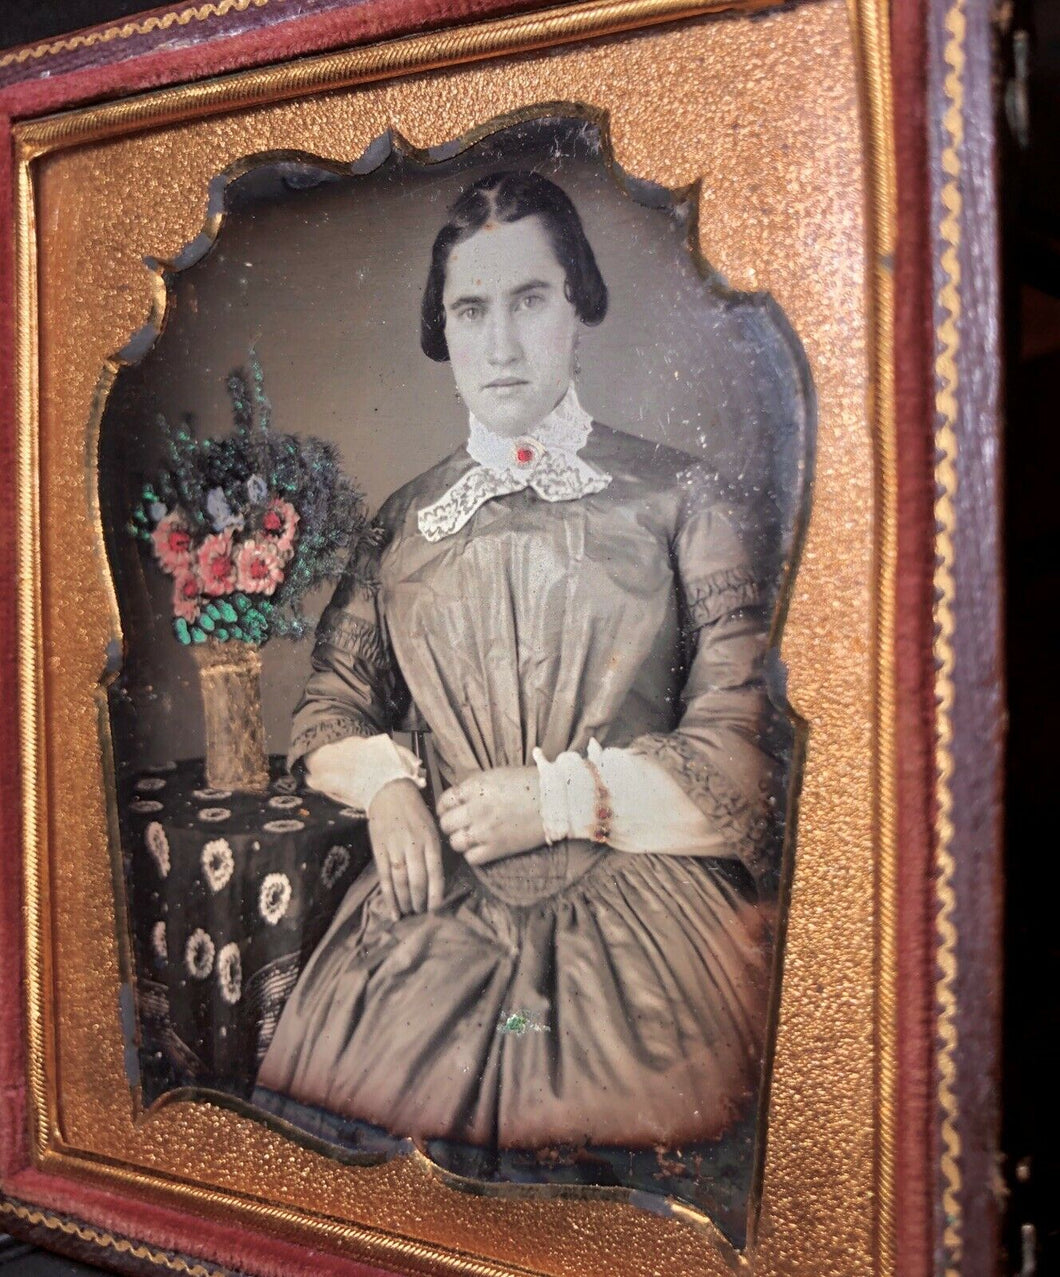 1/6 Daguerreotype Pretty Woman Tinted Cheeks, Boldly Painted Flowers & Vase